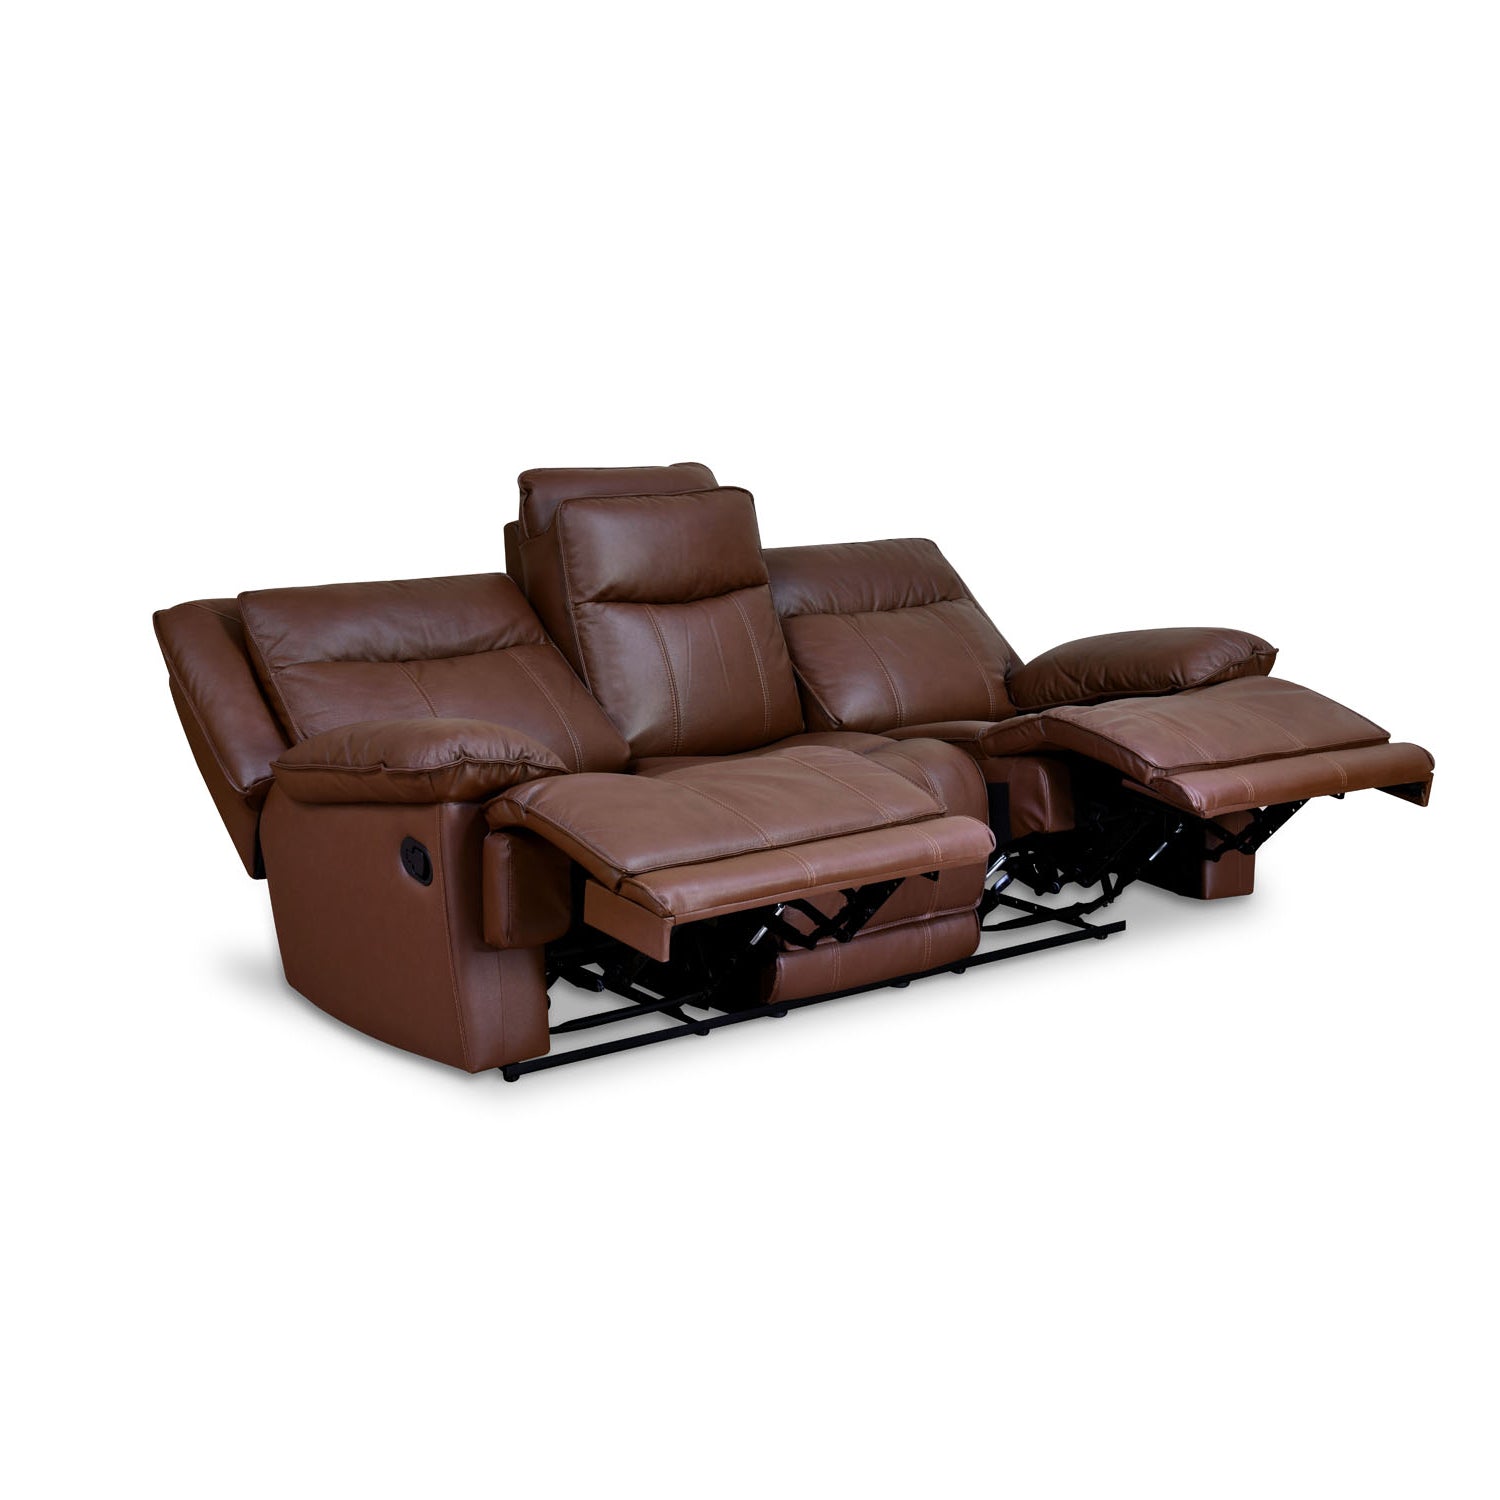 Hayes 3 Seater Leather Manual Recliner with Center Back Dropdown Table (Brown)